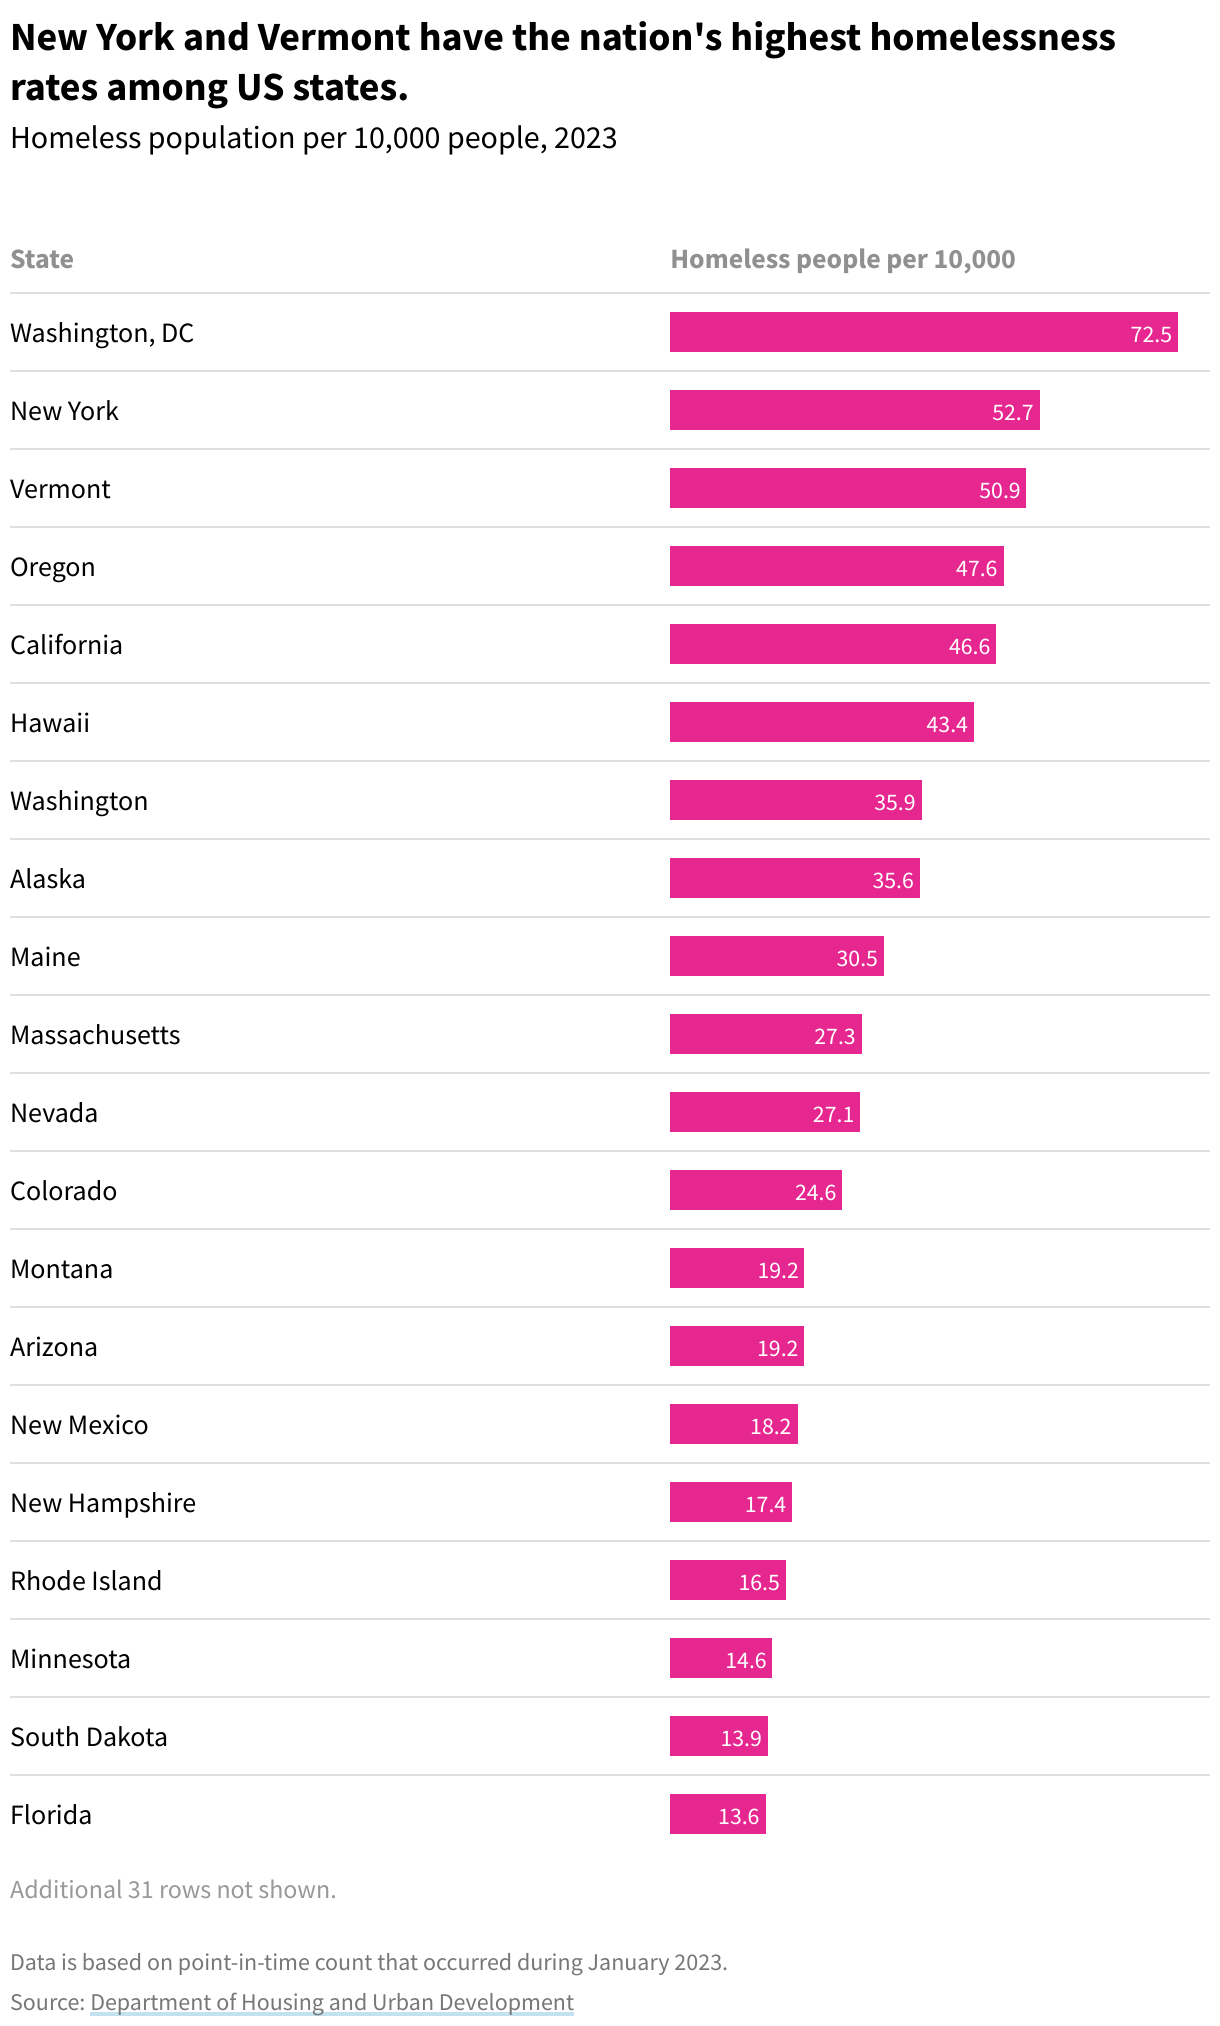 A table showing the states (and Washington, DC) with the highest rates of homelessness per 10,000 people. Washington, DC, New York, and Vermont have the highest homelessness rates.